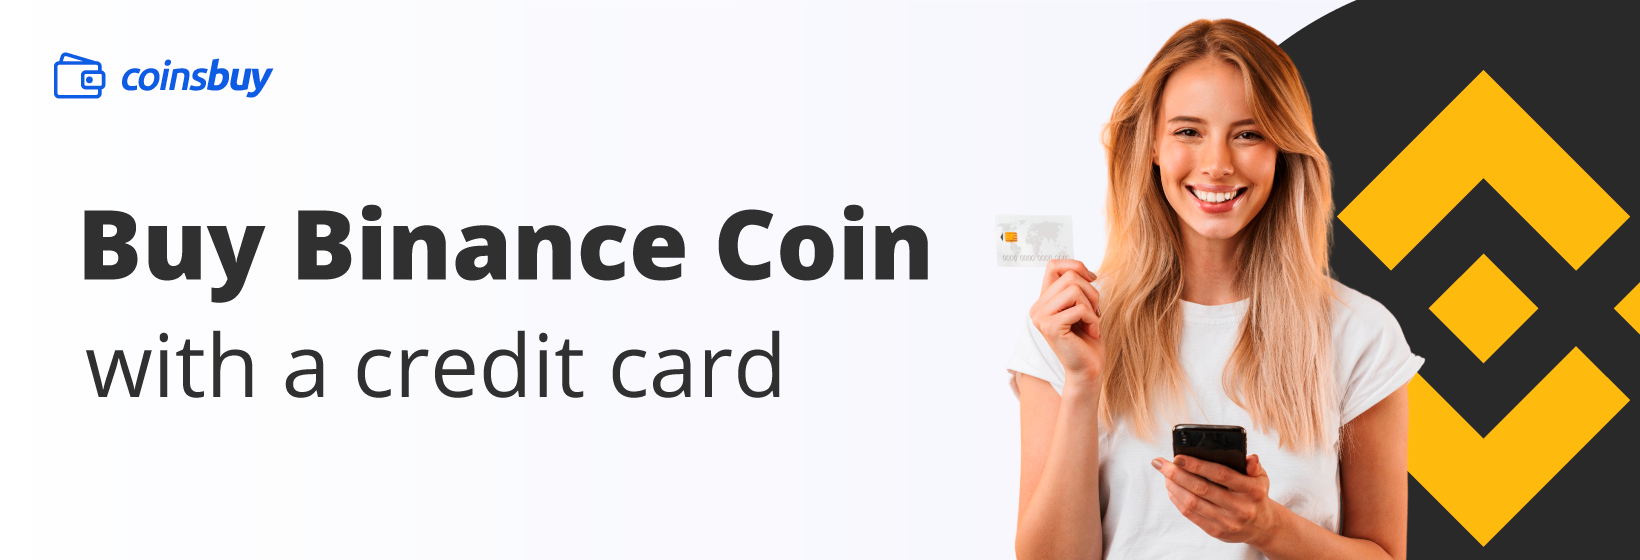 Buy Binance Coin with credit card